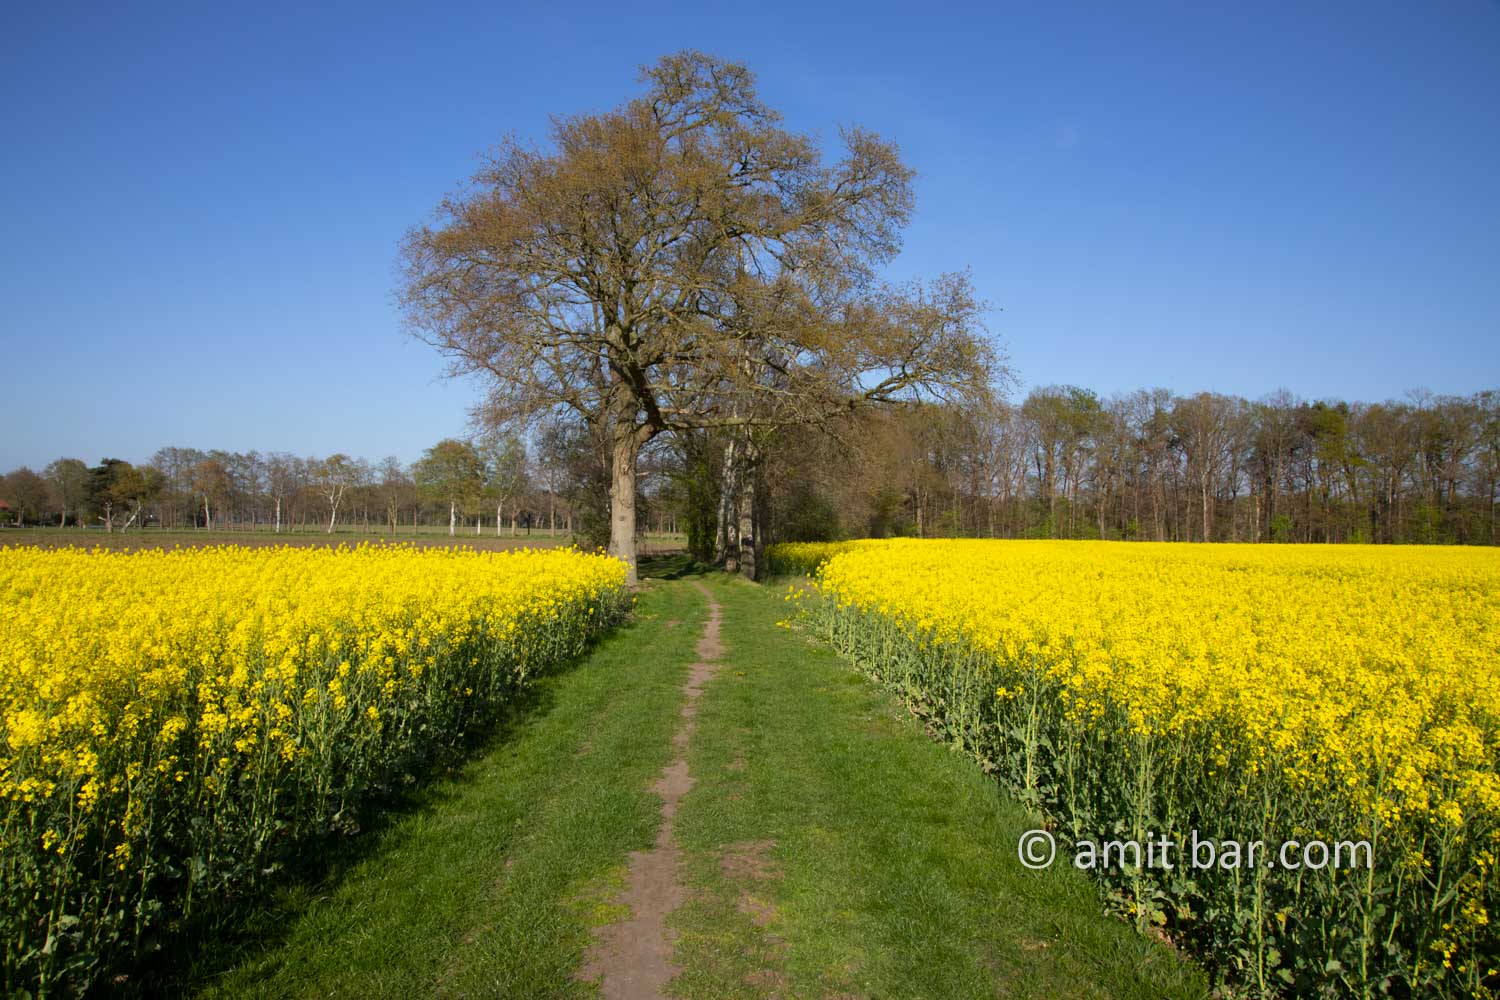 Rapeseed field with oak trees II: Rapeseed field with oak trees at IJzevoorde, The Netherlands in spring time